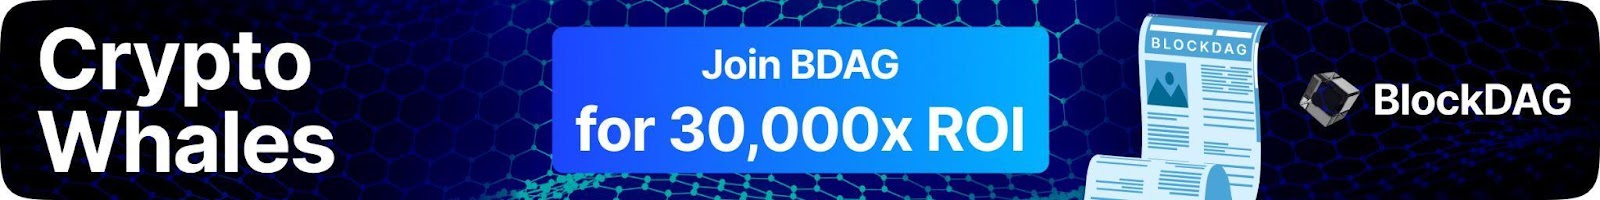 BlockDAG Hits The Moon With Keynote Teaser Amid $10 by 2025 Projection, Presale Set To Oust Pushd and Furrever Token